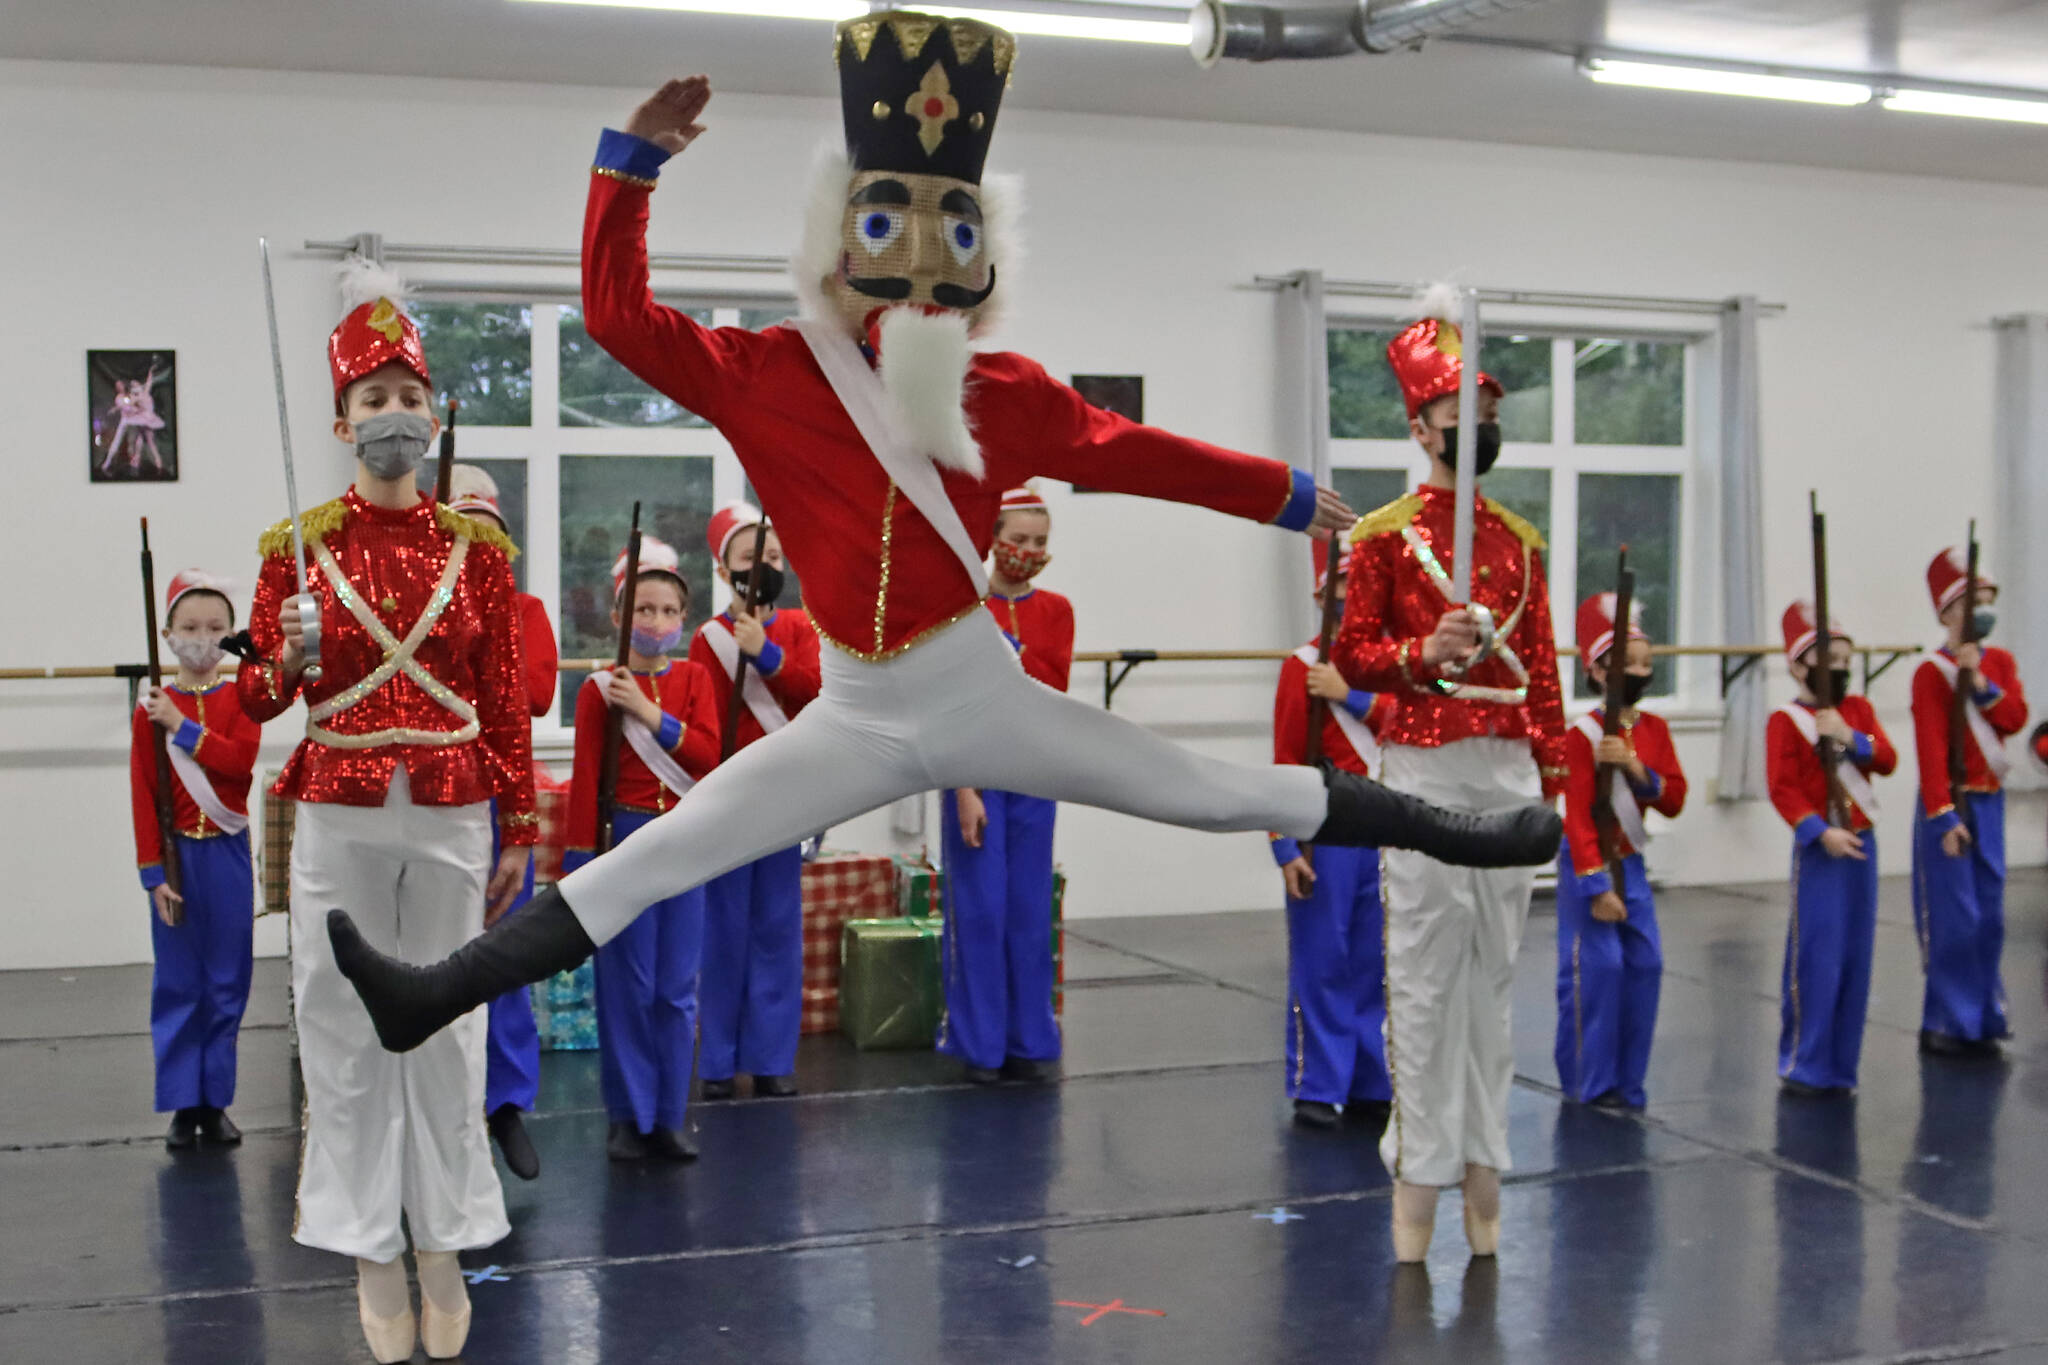 Viktor Bell rehearses his role in "The Nutcracker" on Saturday, Nov. 27. Lead soldiers Grace Bultez and Ainsley Mallott stand guard. (Ben Hohenstatt/Juneau Empire)